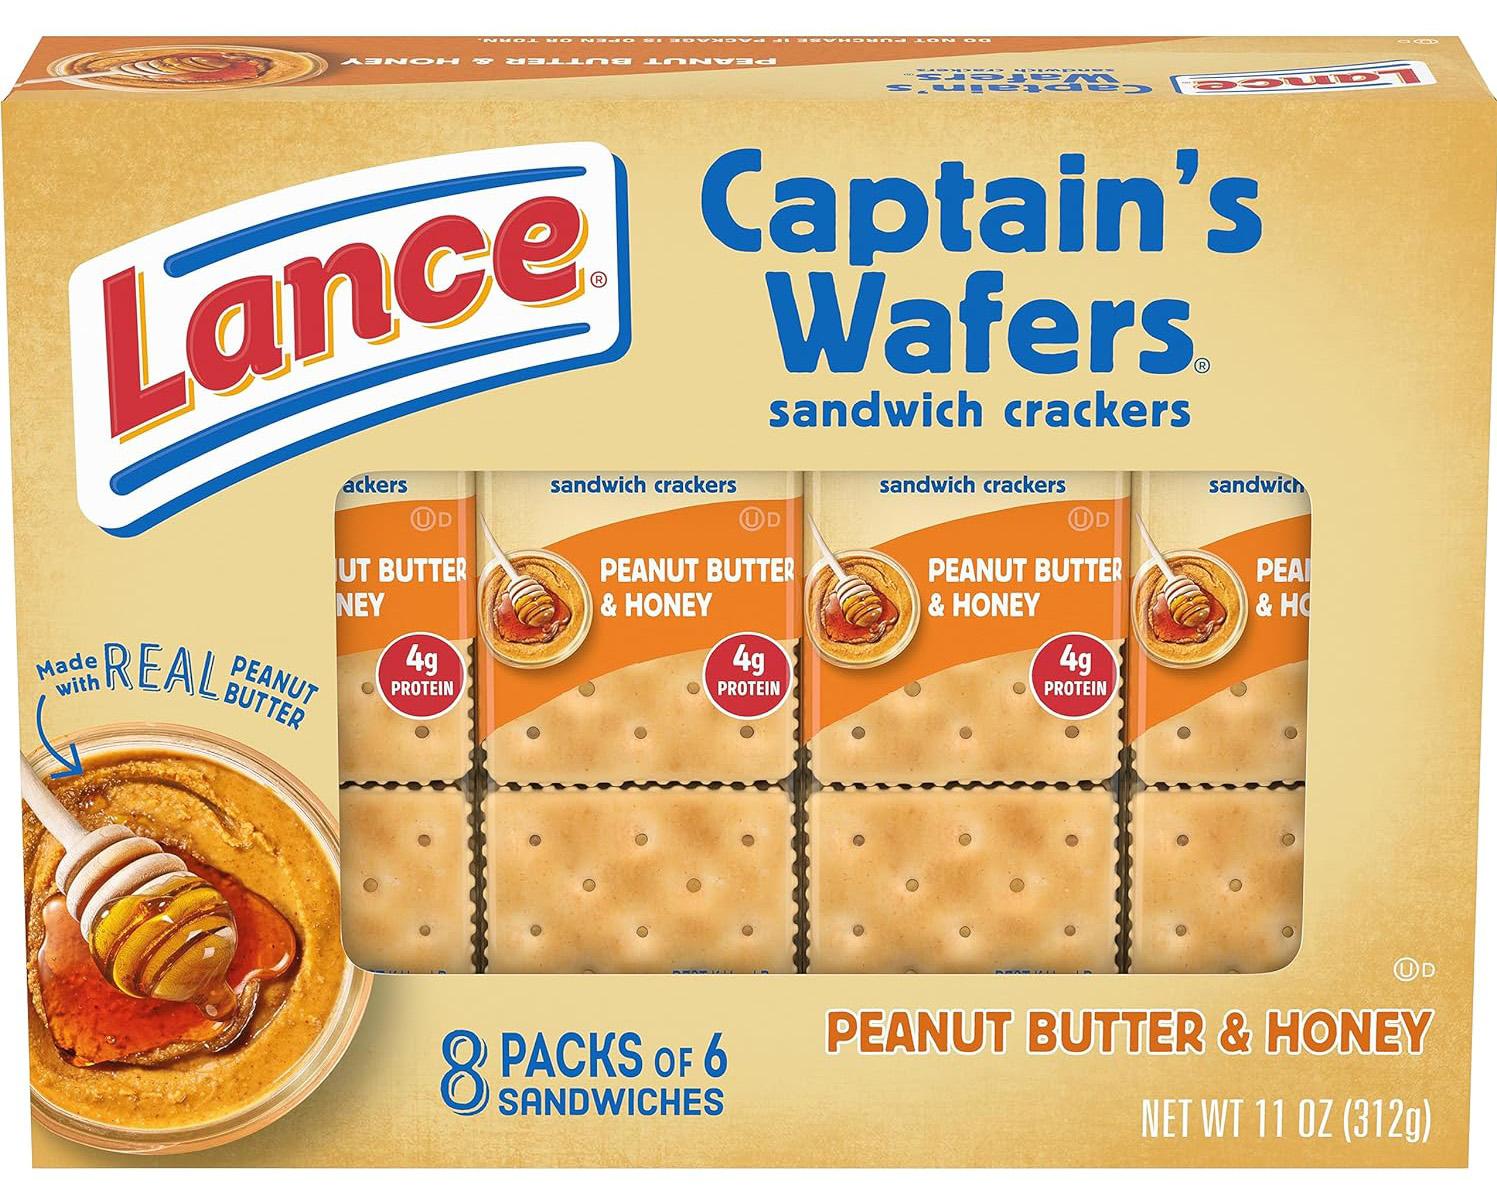 Lance Captains Wafers Peanut Butter and Honey Sandwich Crackers for $2.60